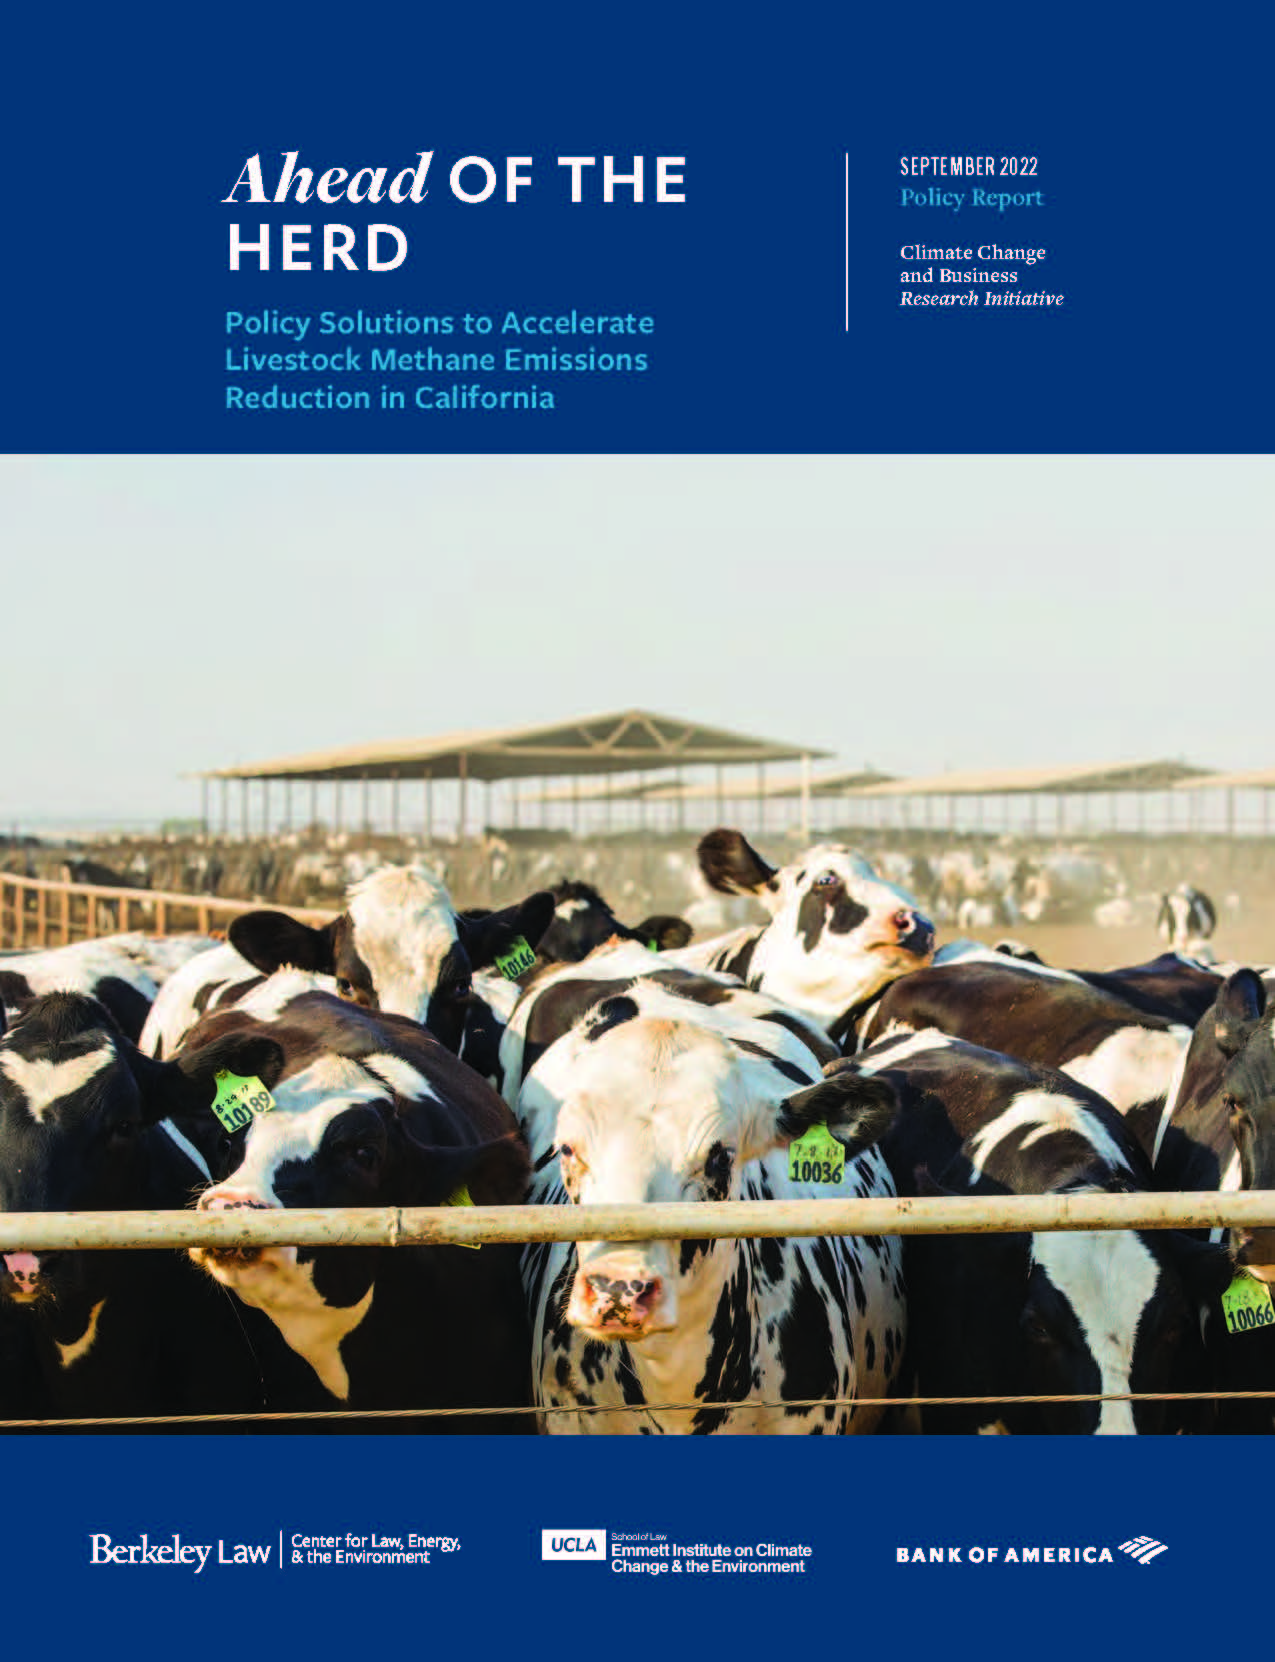 Report cover featuring image of cattle feedlot